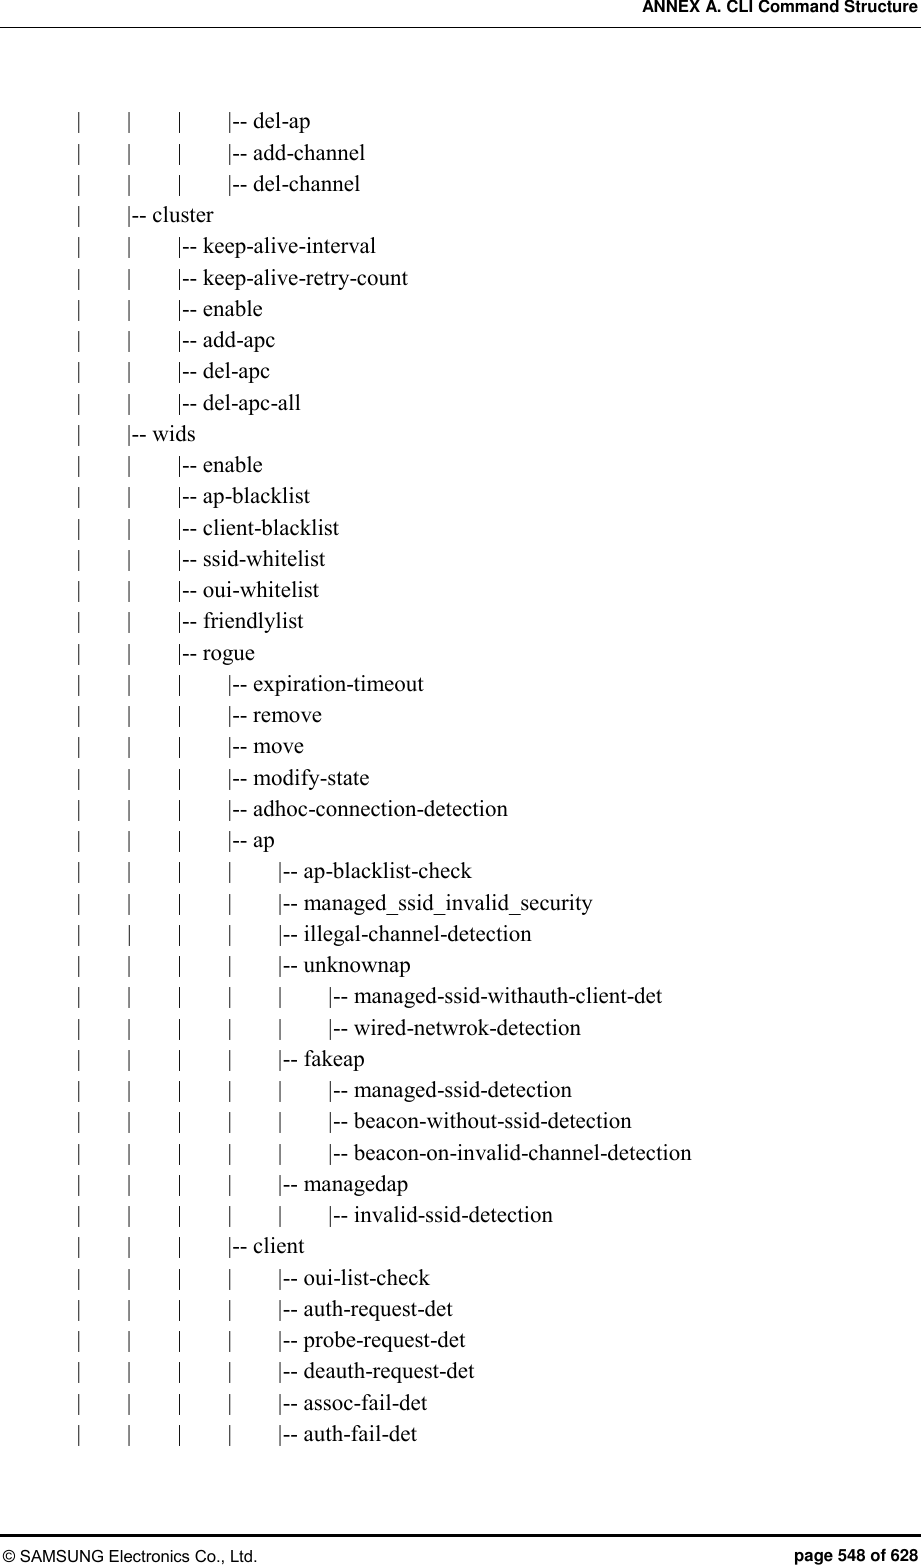 ANNEX A. CLI Command Structure © SAMSUNG Electronics Co., Ltd.  page 548 of 628 |        |        |        |-- del-ap |        |        |        |-- add-channel |        |        |        |-- del-channel |        |-- cluster |        |        |-- keep-alive-interval |        |        |-- keep-alive-retry-count |        |        |-- enable |        |        |-- add-apc |        |        |-- del-apc |        |        |-- del-apc-all |        |-- wids |        |        |-- enable |        |        |-- ap-blacklist |        |        |-- client-blacklist |        |        |-- ssid-whitelist |        |        |-- oui-whitelist |        |        |-- friendlylist |        |        |-- rogue |        |        |        |-- expiration-timeout |        |        |        |-- remove |        |        |        |-- move |        |        |        |-- modify-state |        |        |        |-- adhoc-connection-detection |        |        |        |-- ap |        |        |        |        |-- ap-blacklist-check |        |        |        |        |-- managed_ssid_invalid_security |        |        |        |        |-- illegal-channel-detection |        |        |        |        |-- unknownap |        |        |        |        |        |-- managed-ssid-withauth-client-det |        |        |        |        |        |-- wired-netwrok-detection |        |        |        |        |-- fakeap |        |        |        |        |        |-- managed-ssid-detection |        |        |        |        |        |-- beacon-without-ssid-detection |        |        |        |        |        |-- beacon-on-invalid-channel-detection |        |        |        |        |-- managedap |        |        |        |        |        |-- invalid-ssid-detection |        |        |        |-- client |        |        |        |        |-- oui-list-check |        |        |        |        |-- auth-request-det |        |        |        |        |-- probe-request-det |        |        |        |        |-- deauth-request-det |        |        |        |        |-- assoc-fail-det |        |        |        |        |-- auth-fail-det 